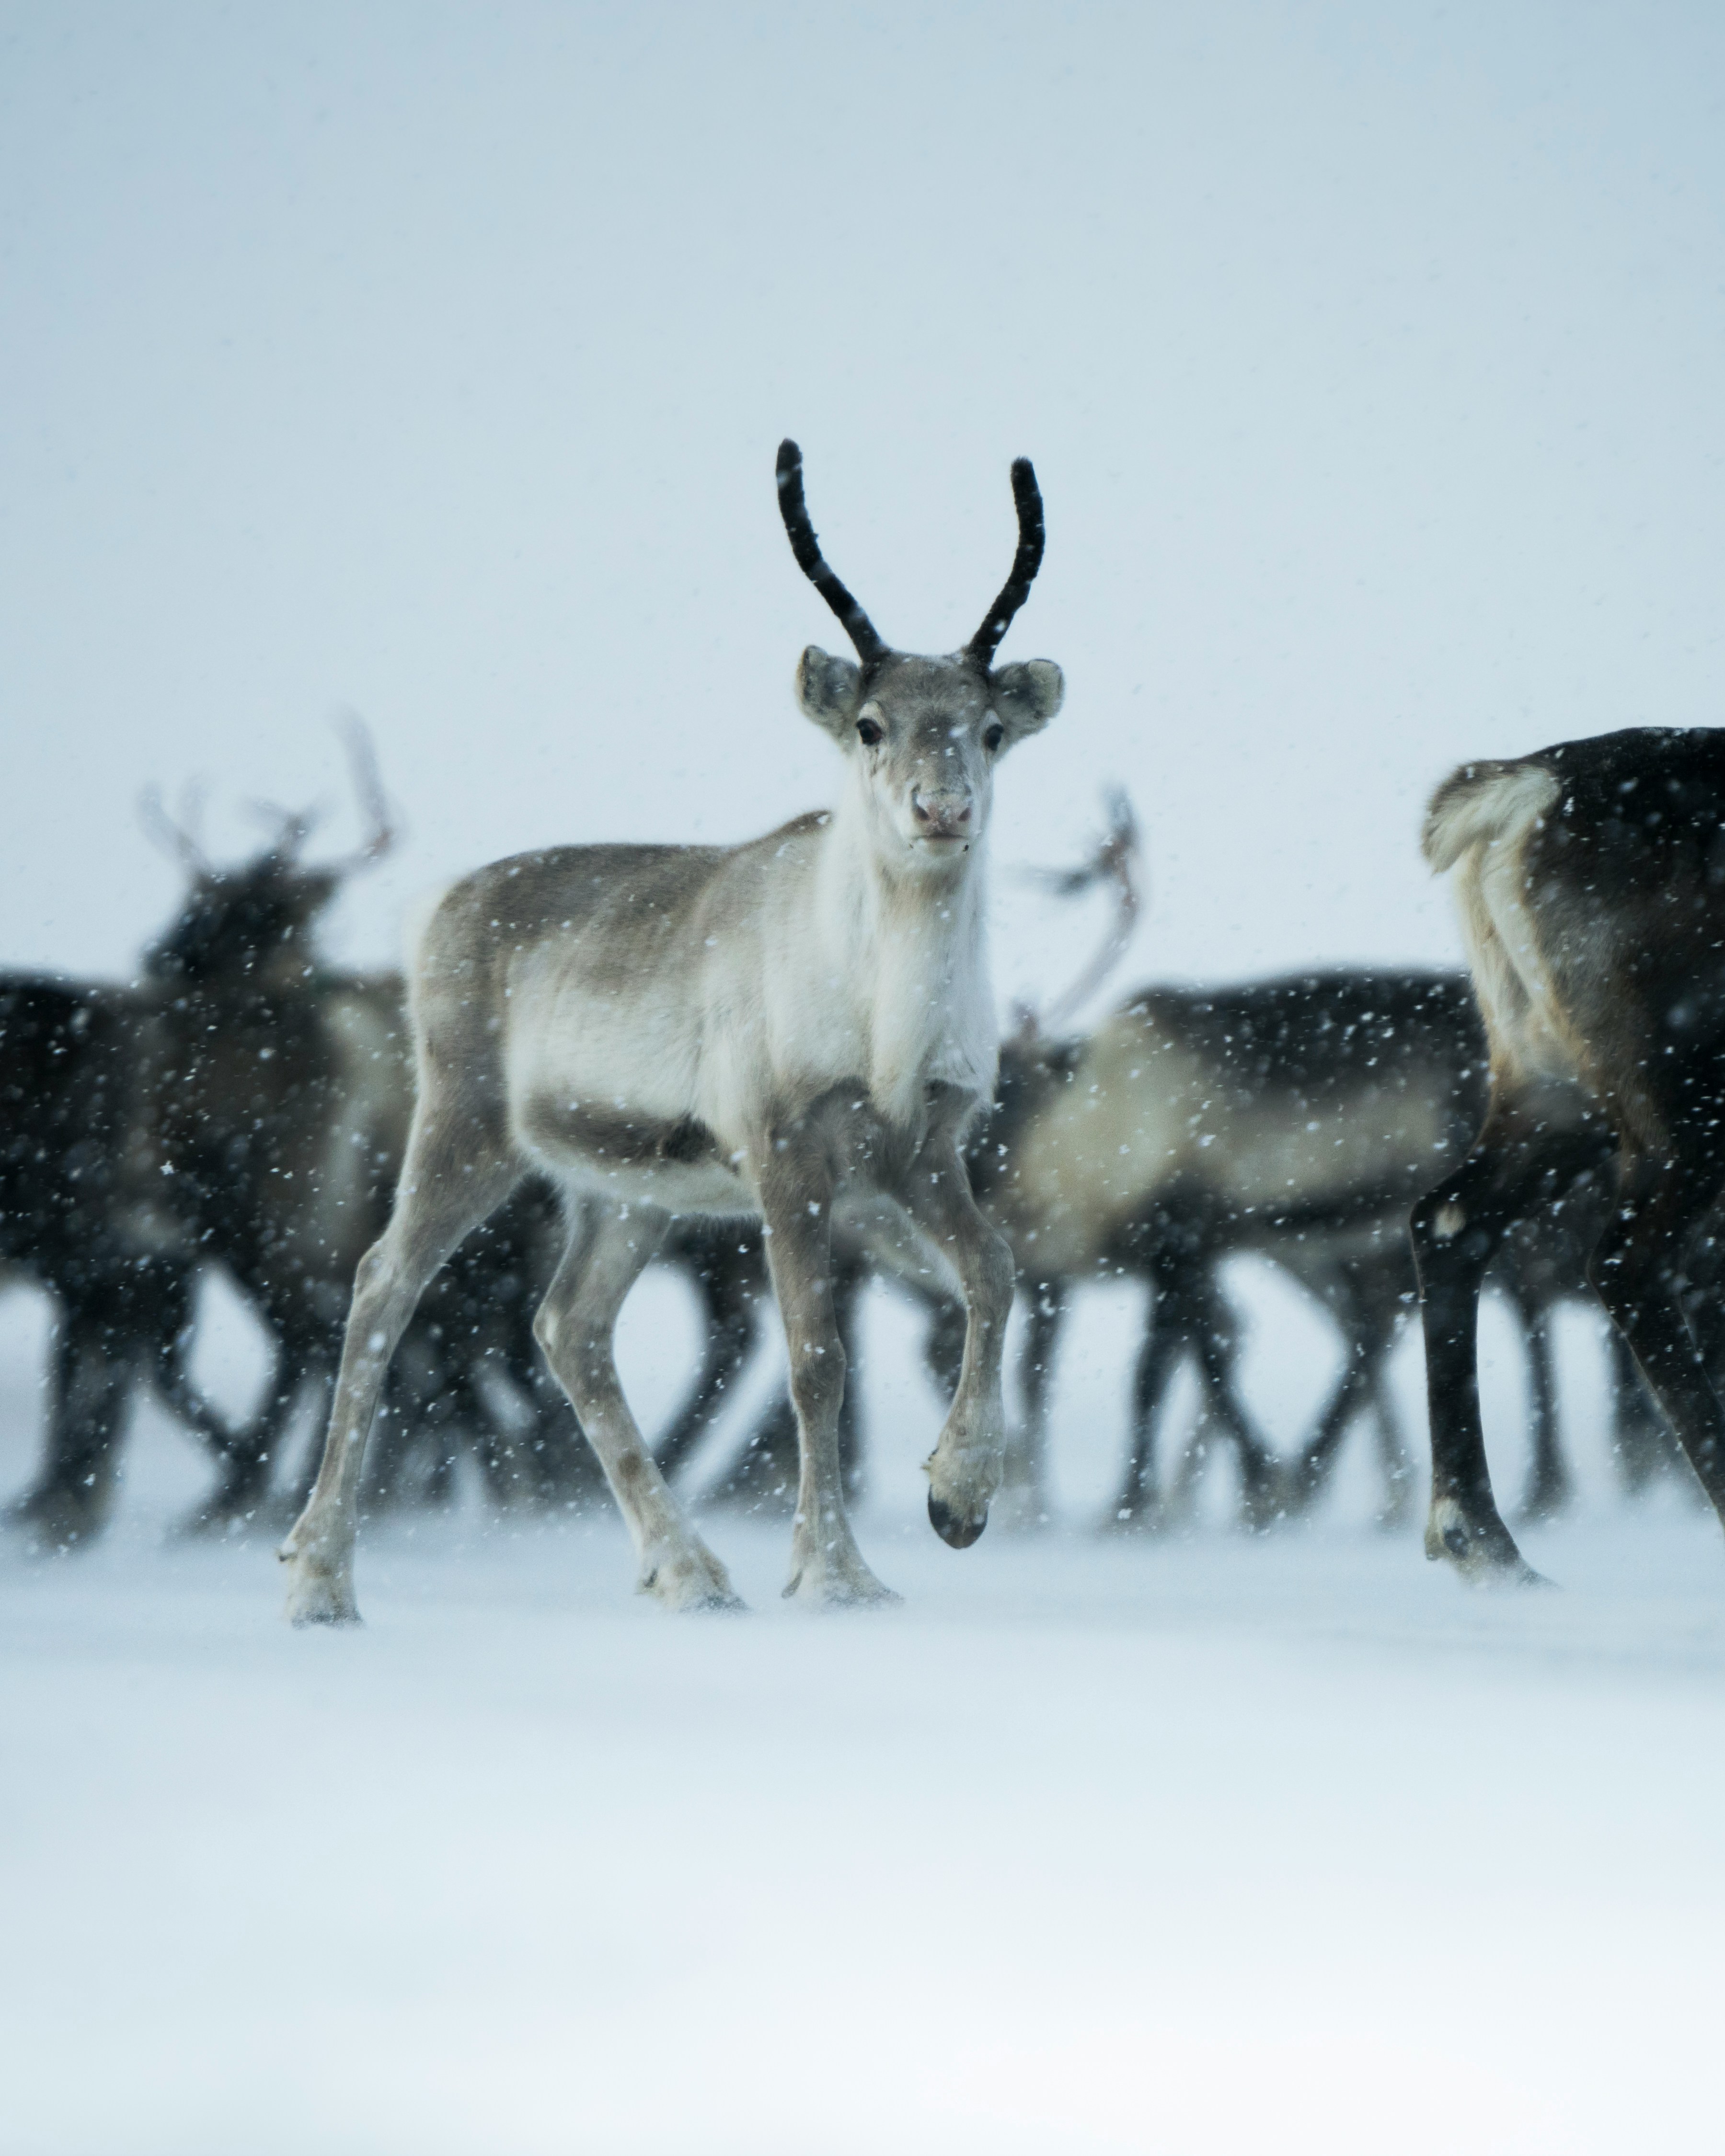 a group of reindeer in the snow